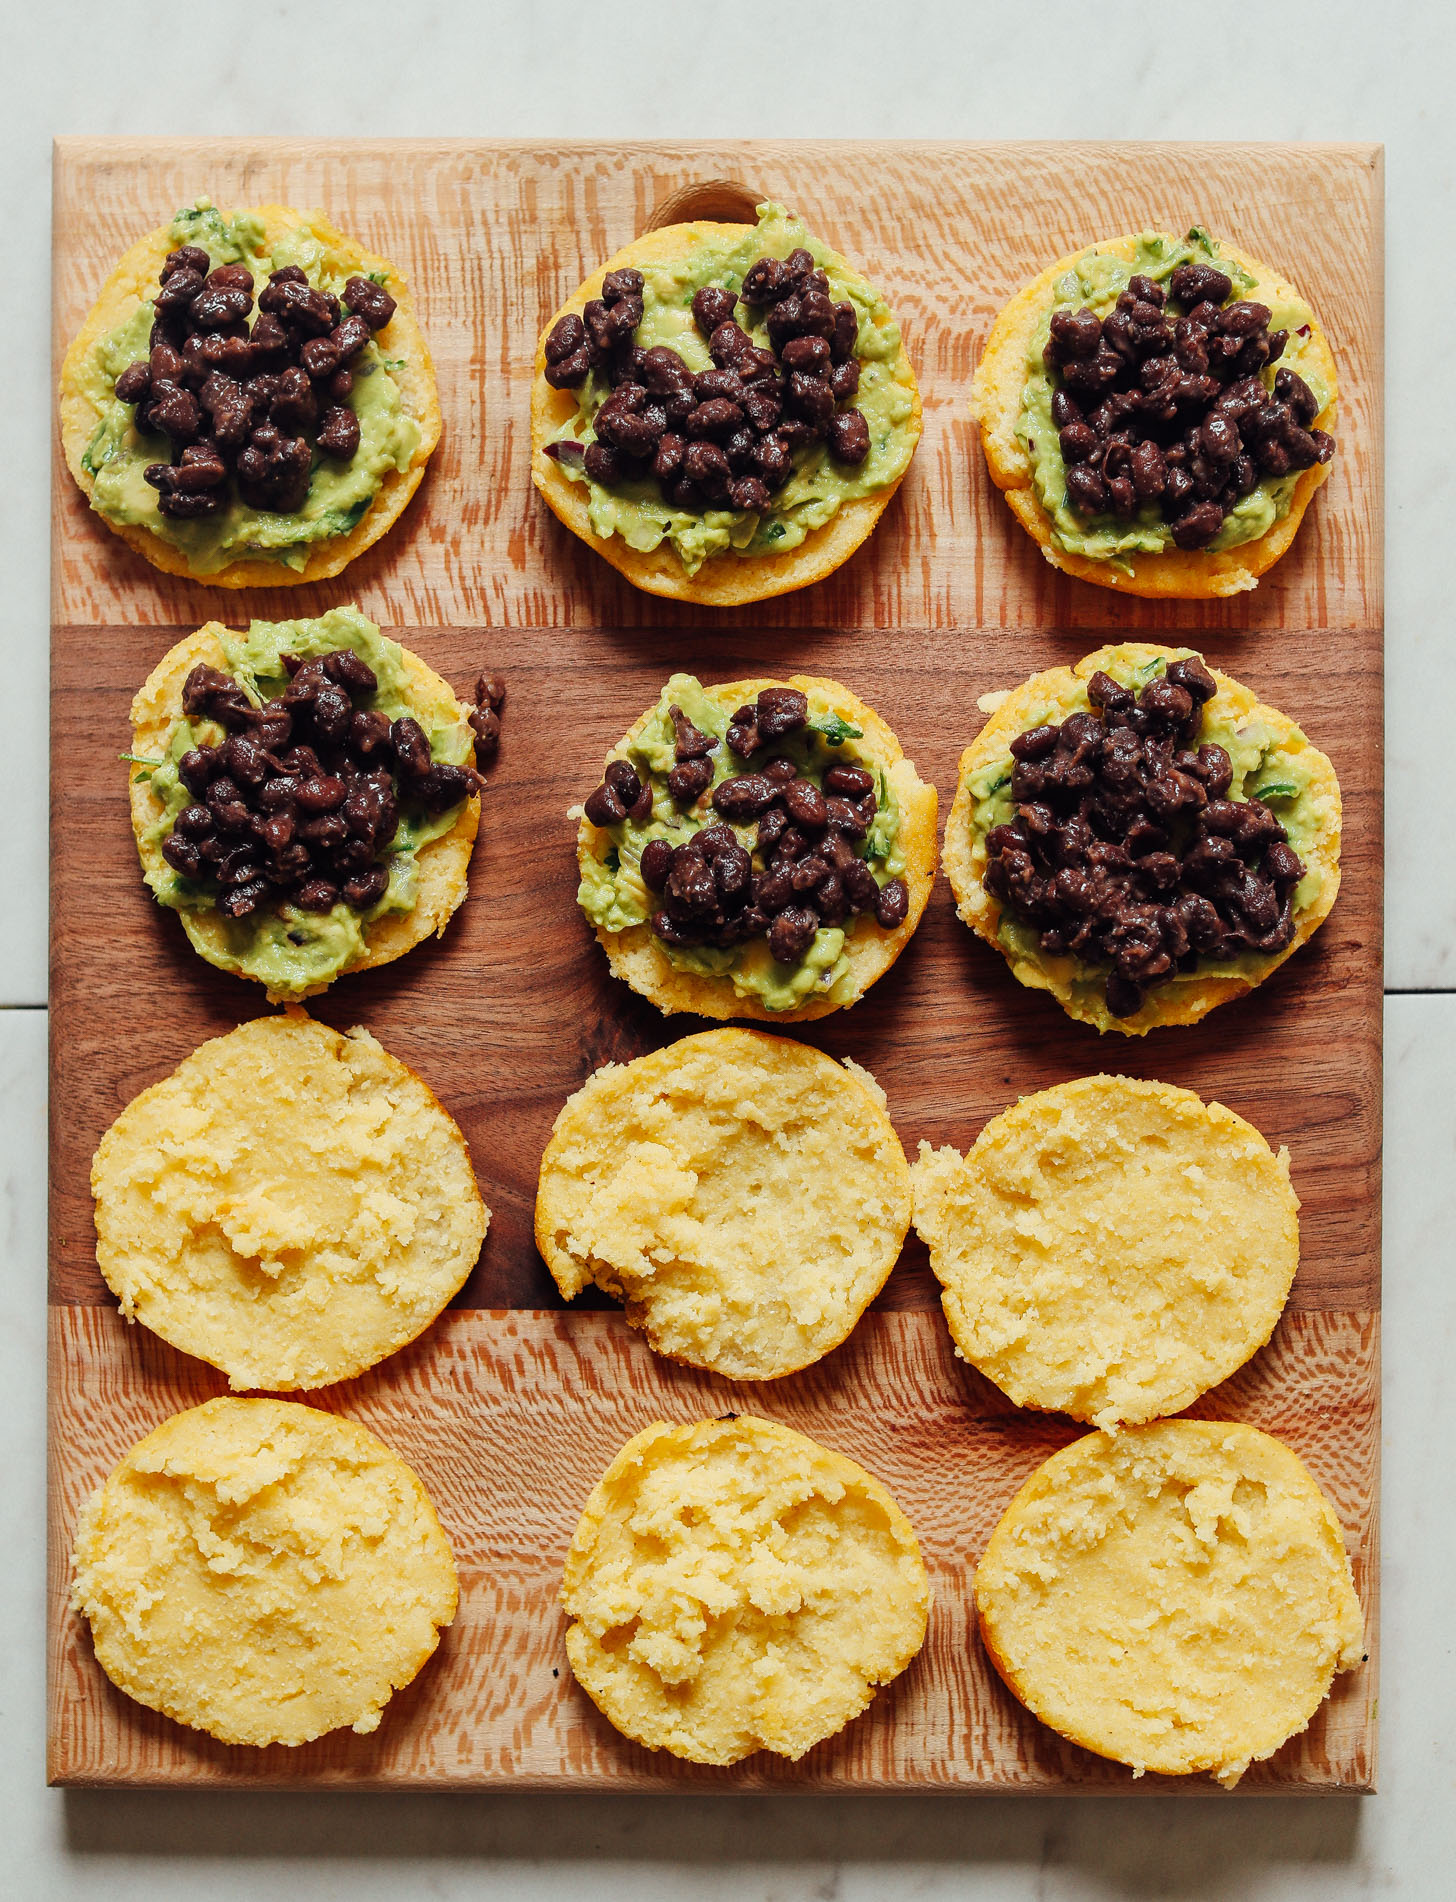 Wood cutting board with open-faced Arepa Sandwiches topped with guacamole and black beans